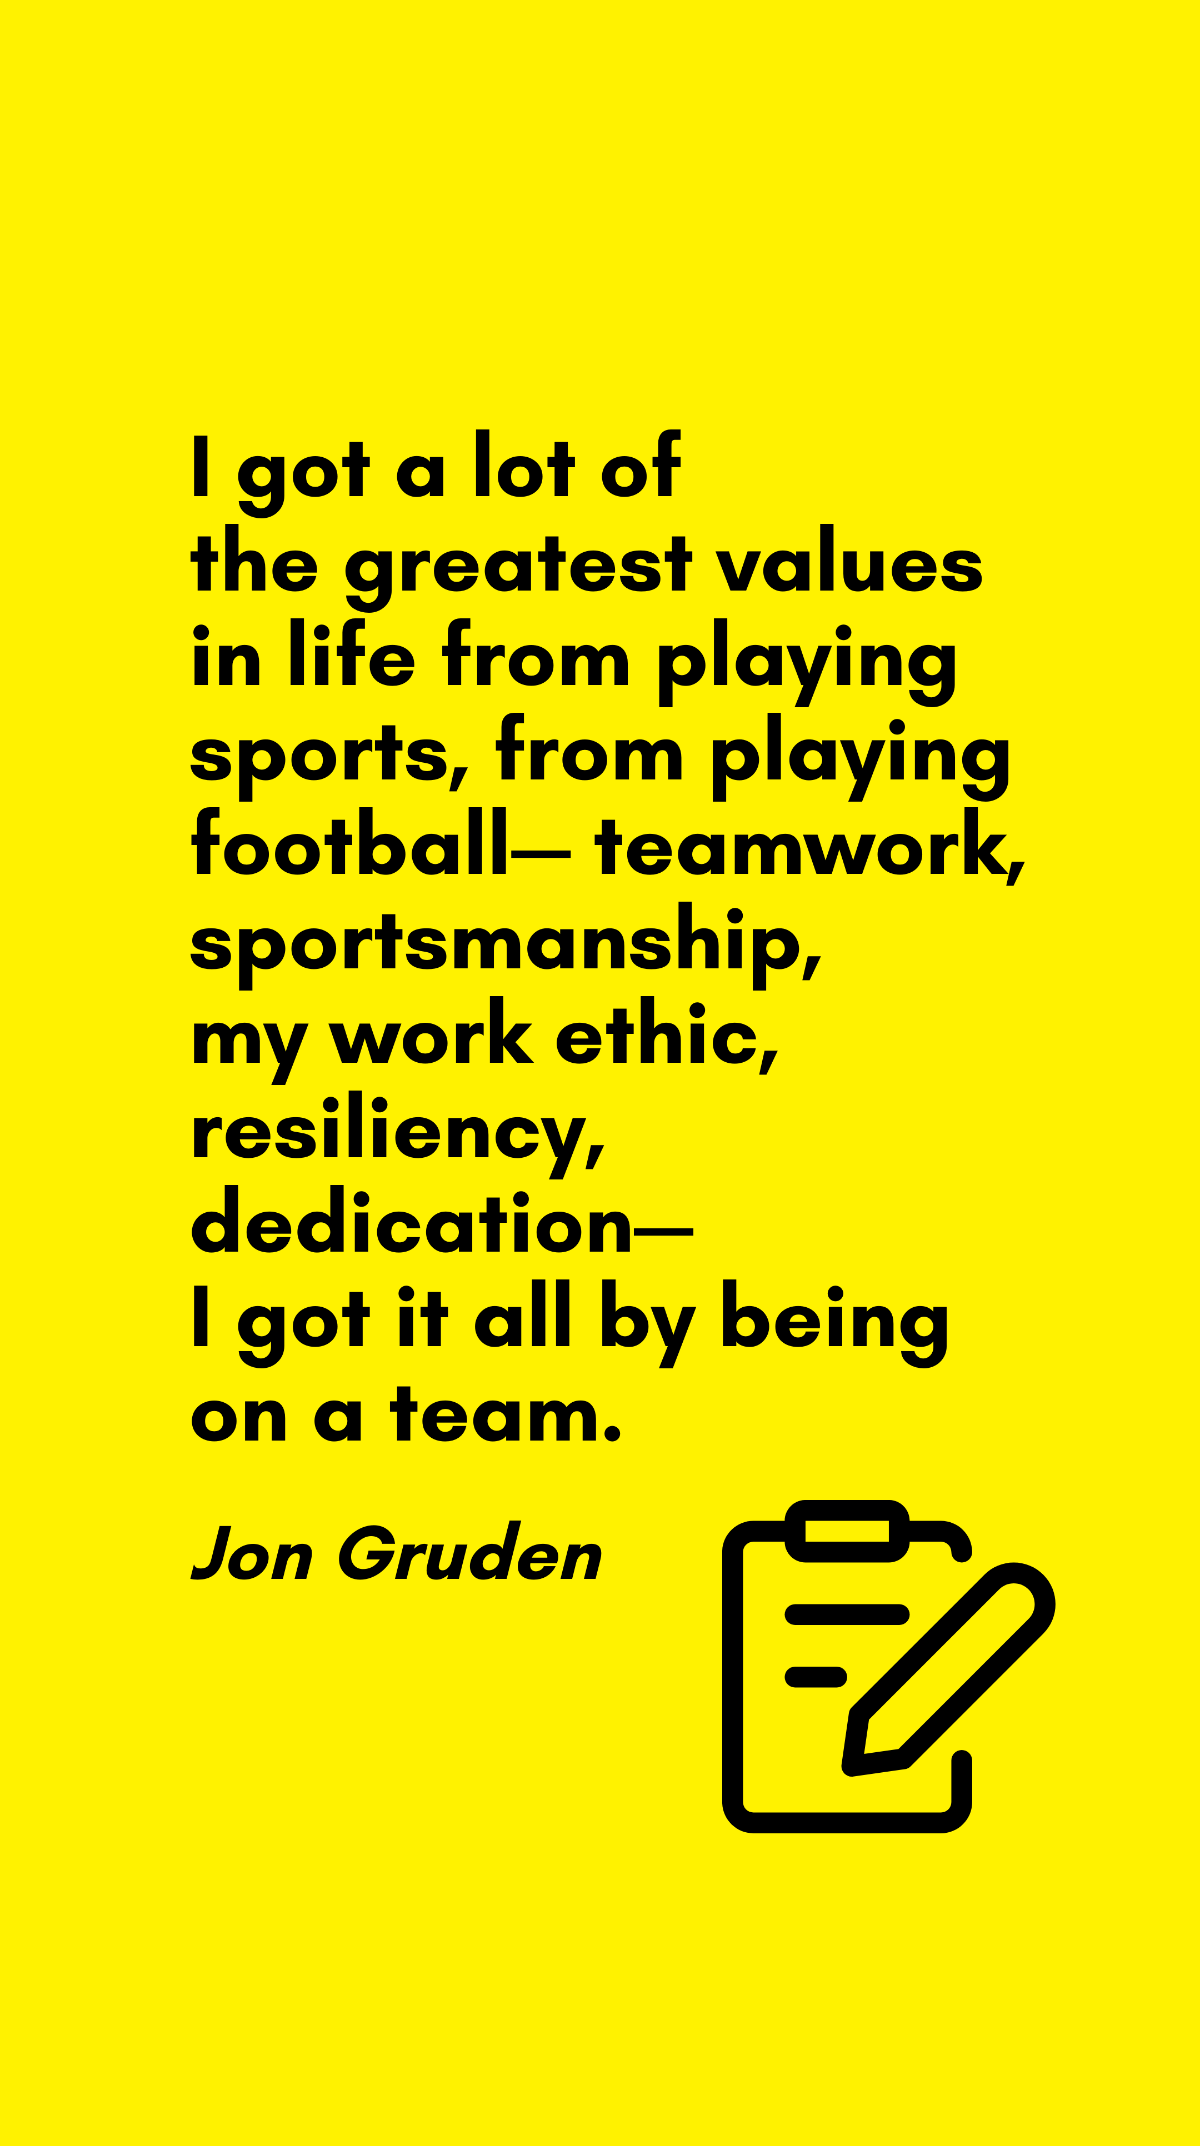 Jon Gruden - I got a lot of the greatest values in life from playing sports, from playing football - teamwork, sportsmanship, my work ethic, resiliency, dedication - I got it all by being on a team. T